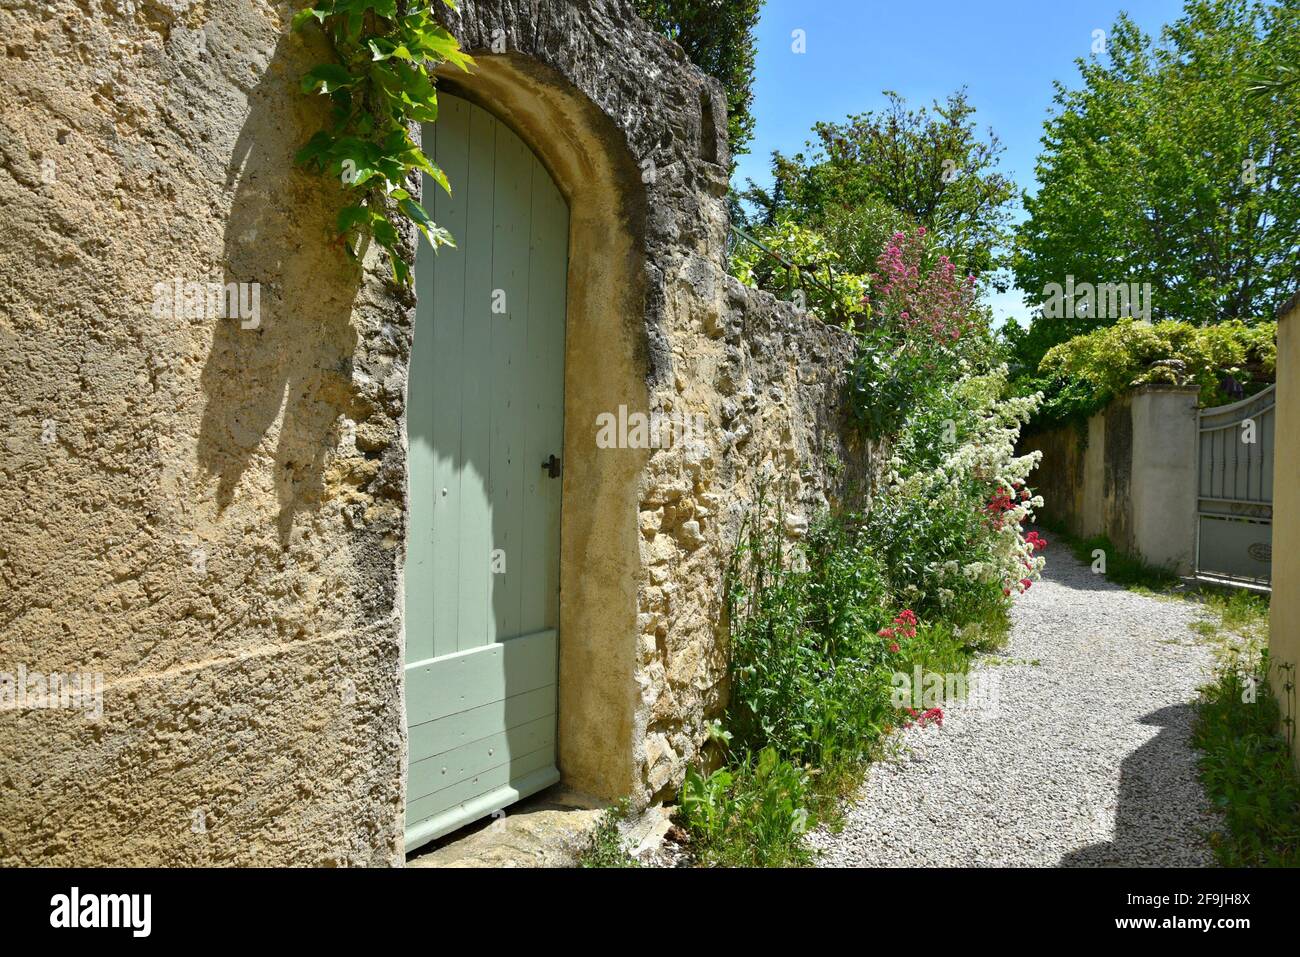 Alley with typical Provençal style architecture in the picturesque village of Lourmarin in Vaucluse, Provence France. Stock Photo